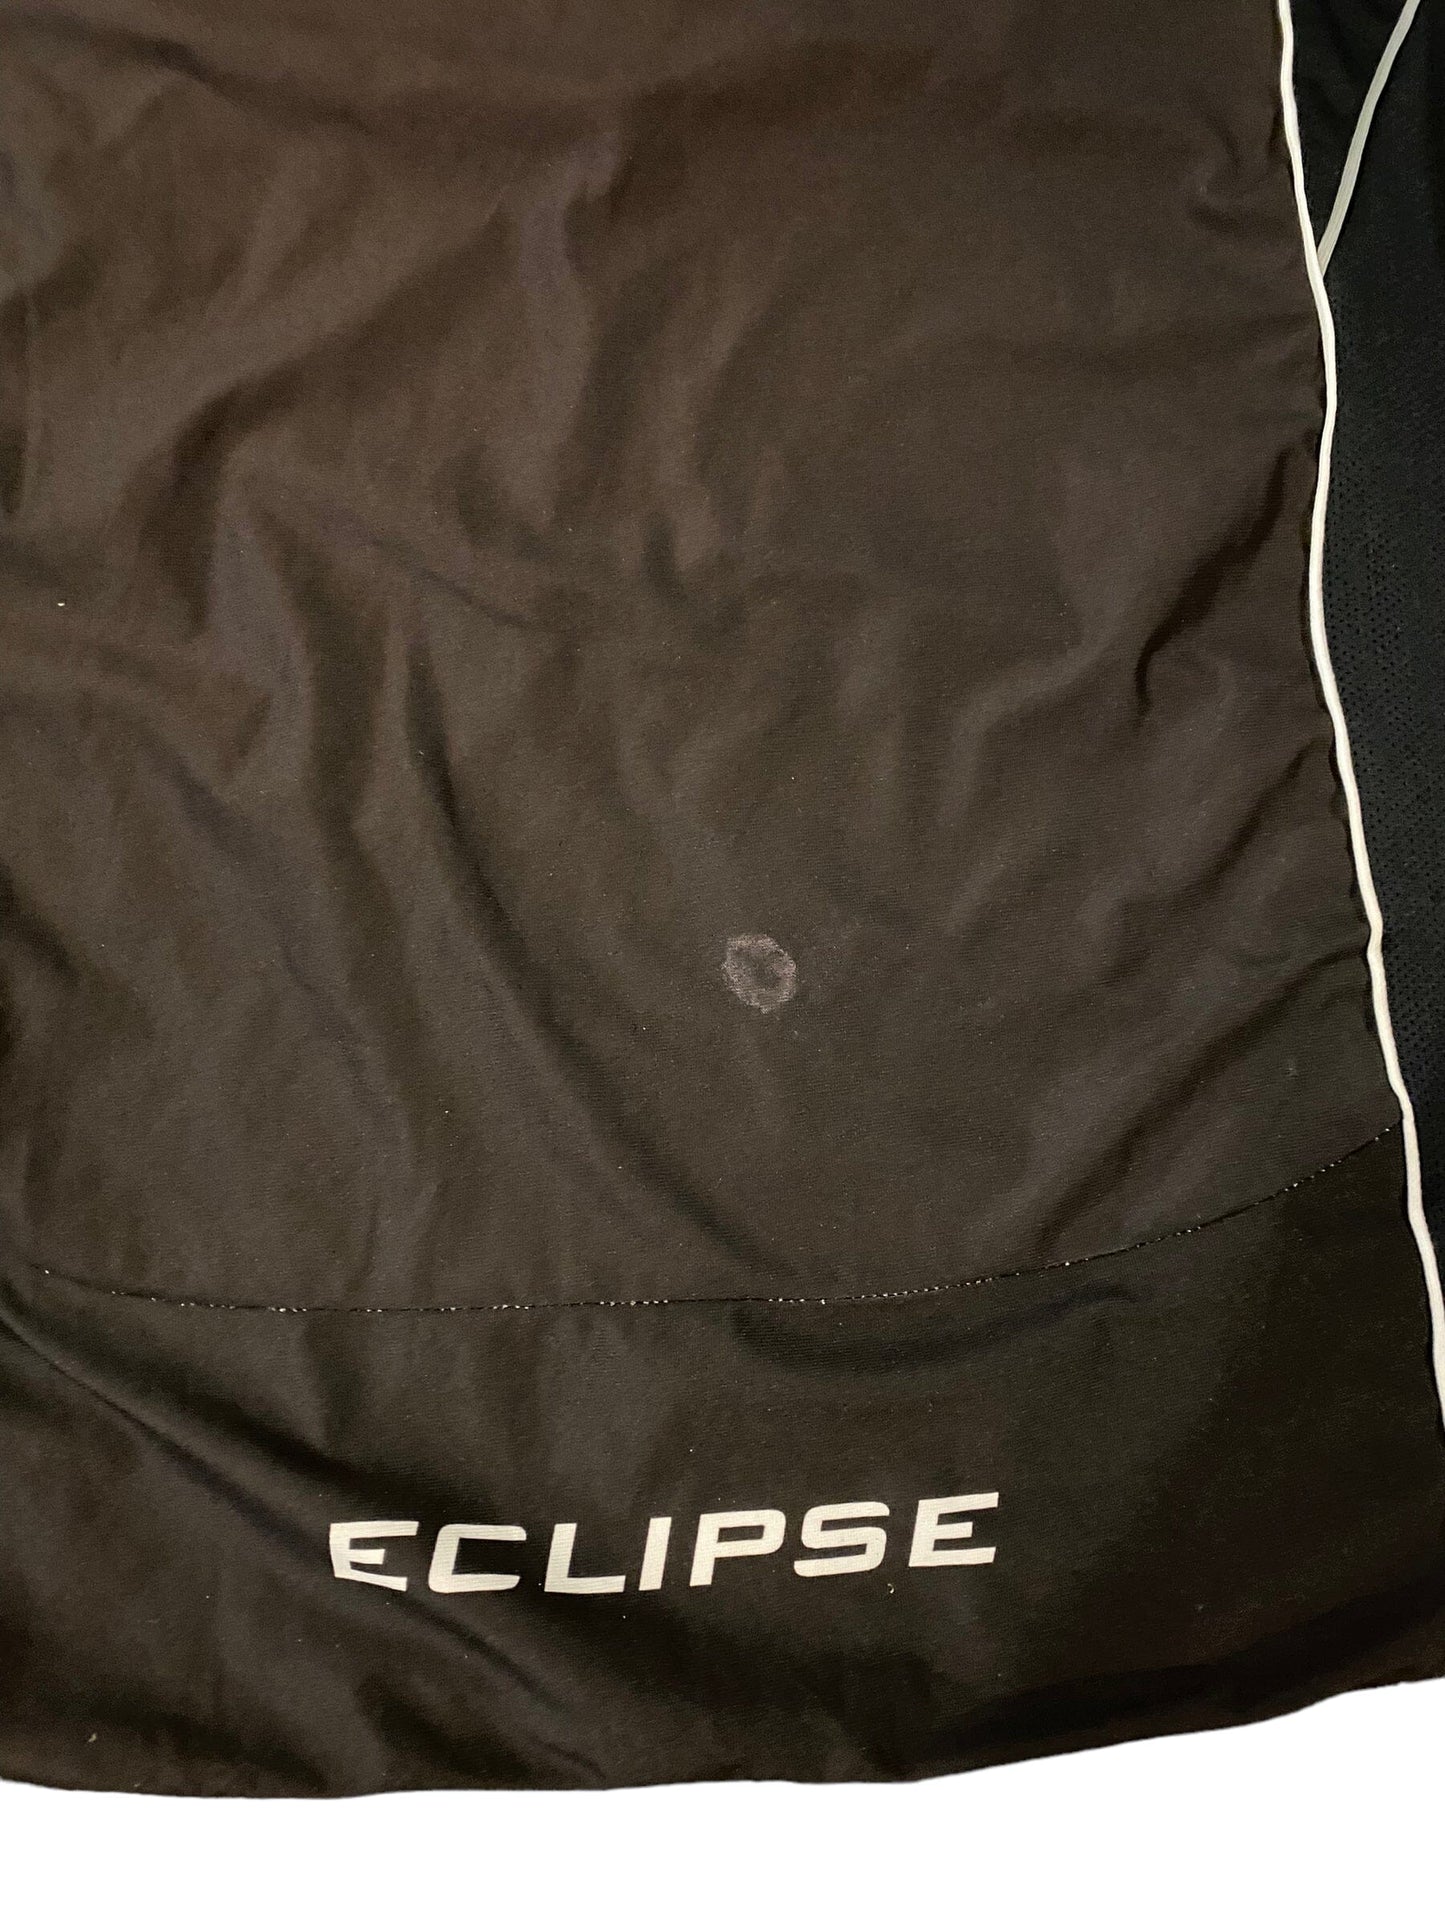 Used Planet Eclipse Paintball Jersey size Large Paintball Gun from CPXBrosPaintball Buy/Sell/Trade Paintball Markers, Paintball Hoppers, Paintball Masks, and Hormesis Headbands